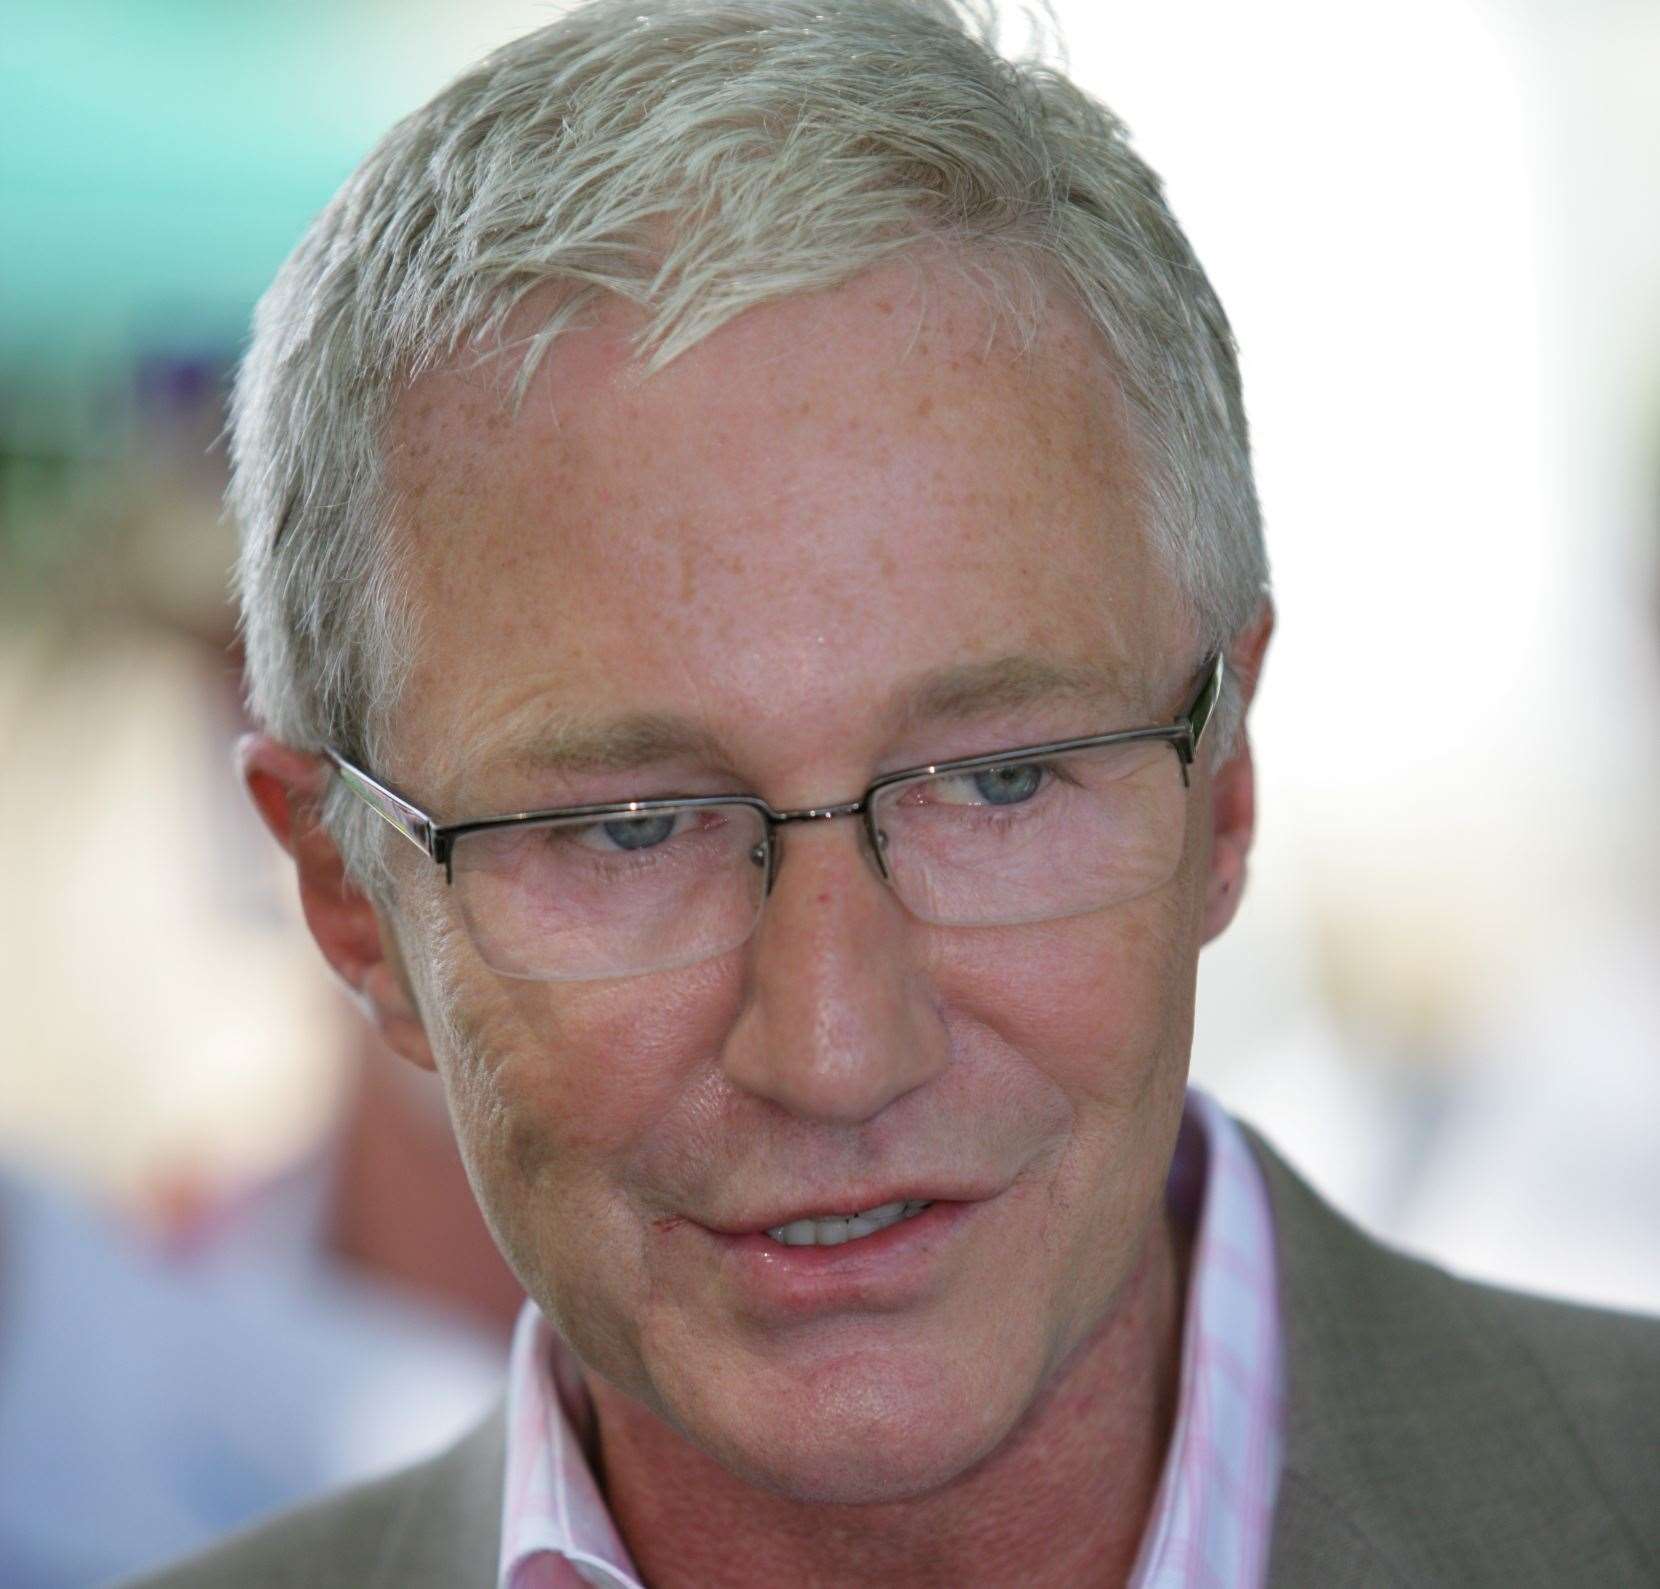 Paul O'Grady will star in the series, which explores his daily life living in Kent